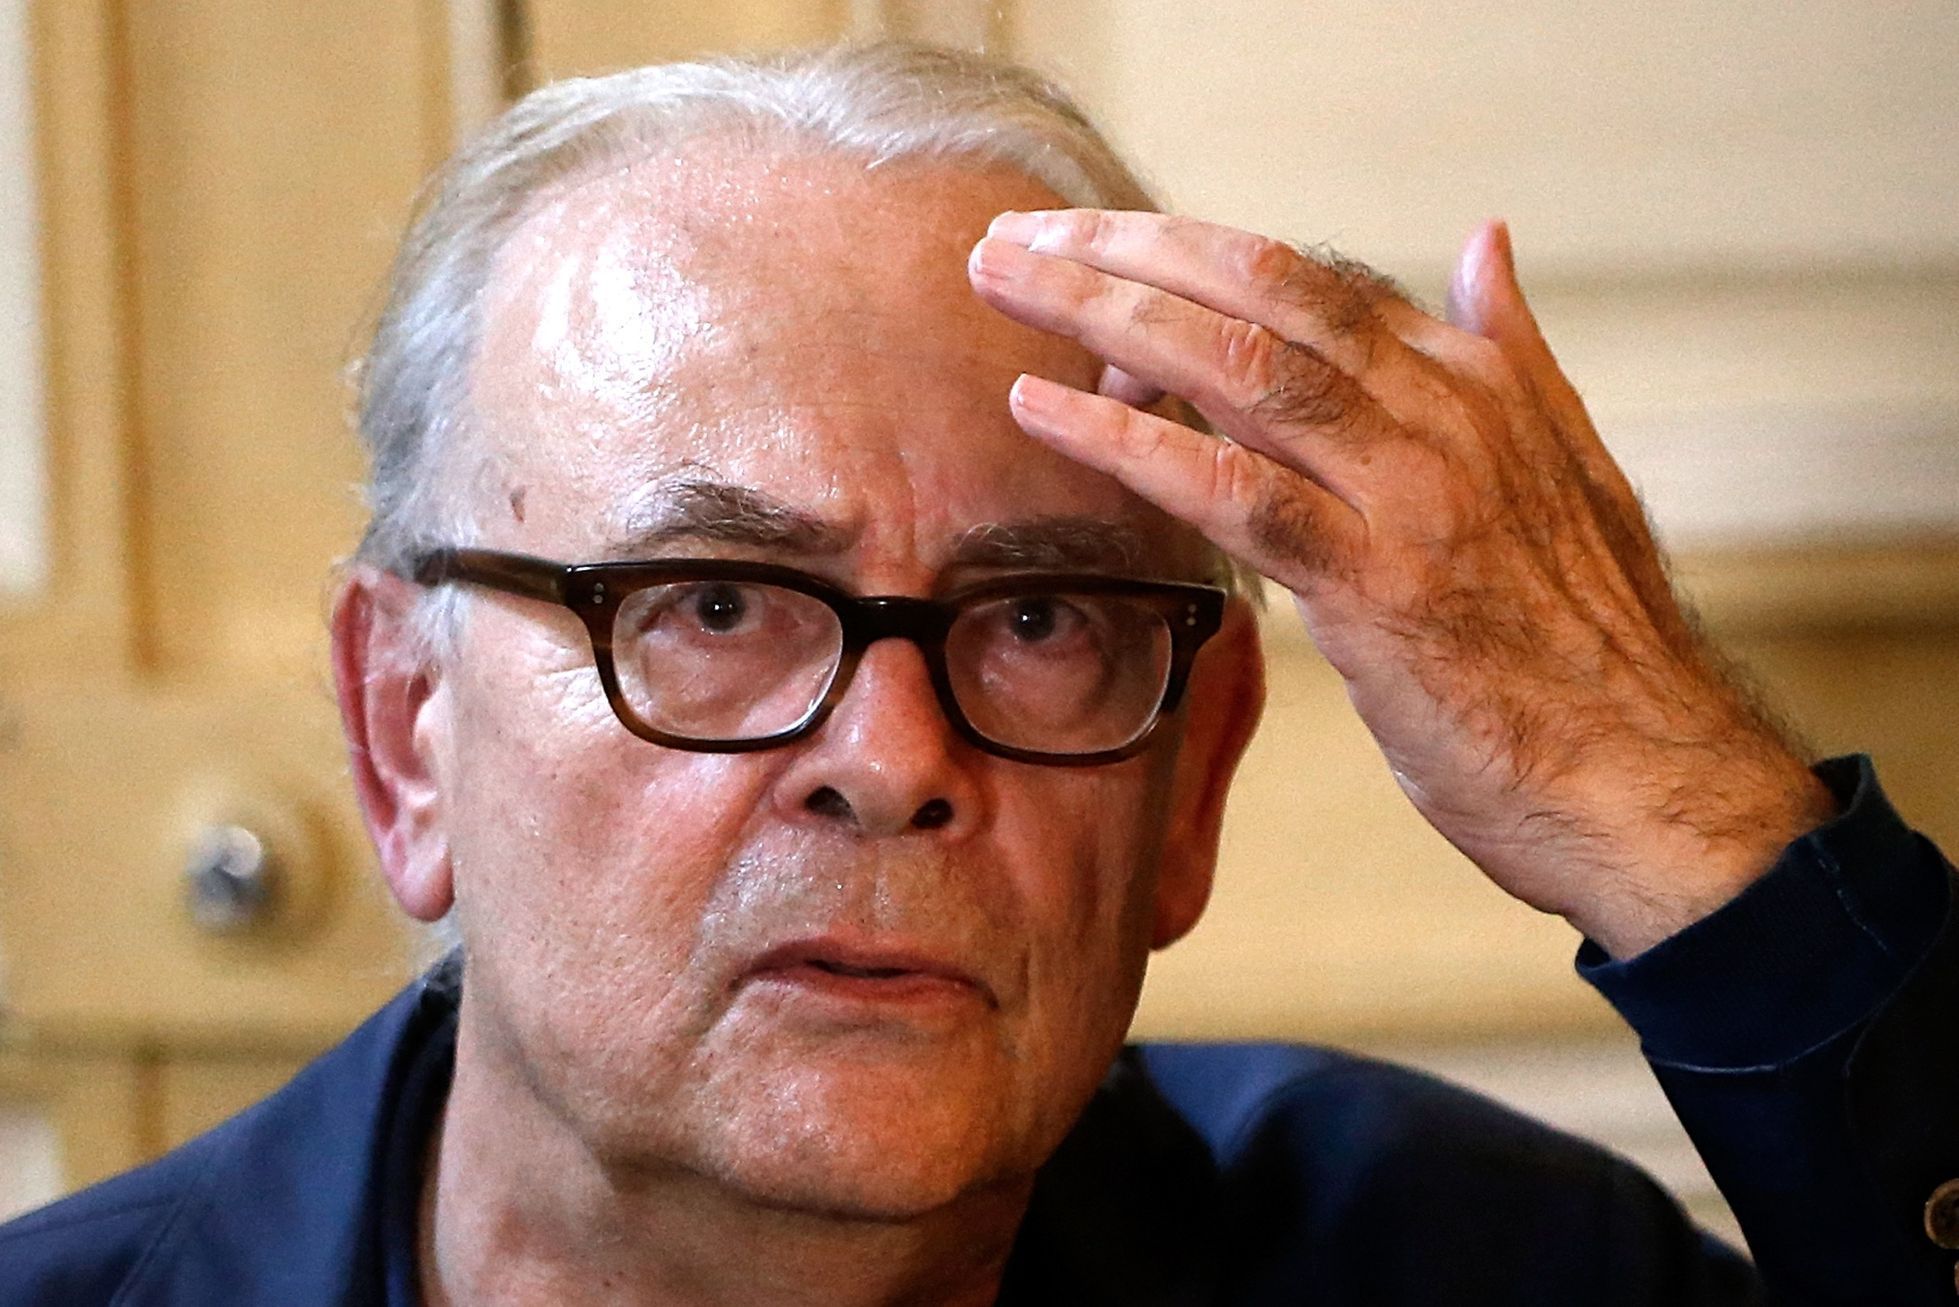 French writer Patrick Modiano speaks during a news conference at the French publishing house Gallimard in Paris